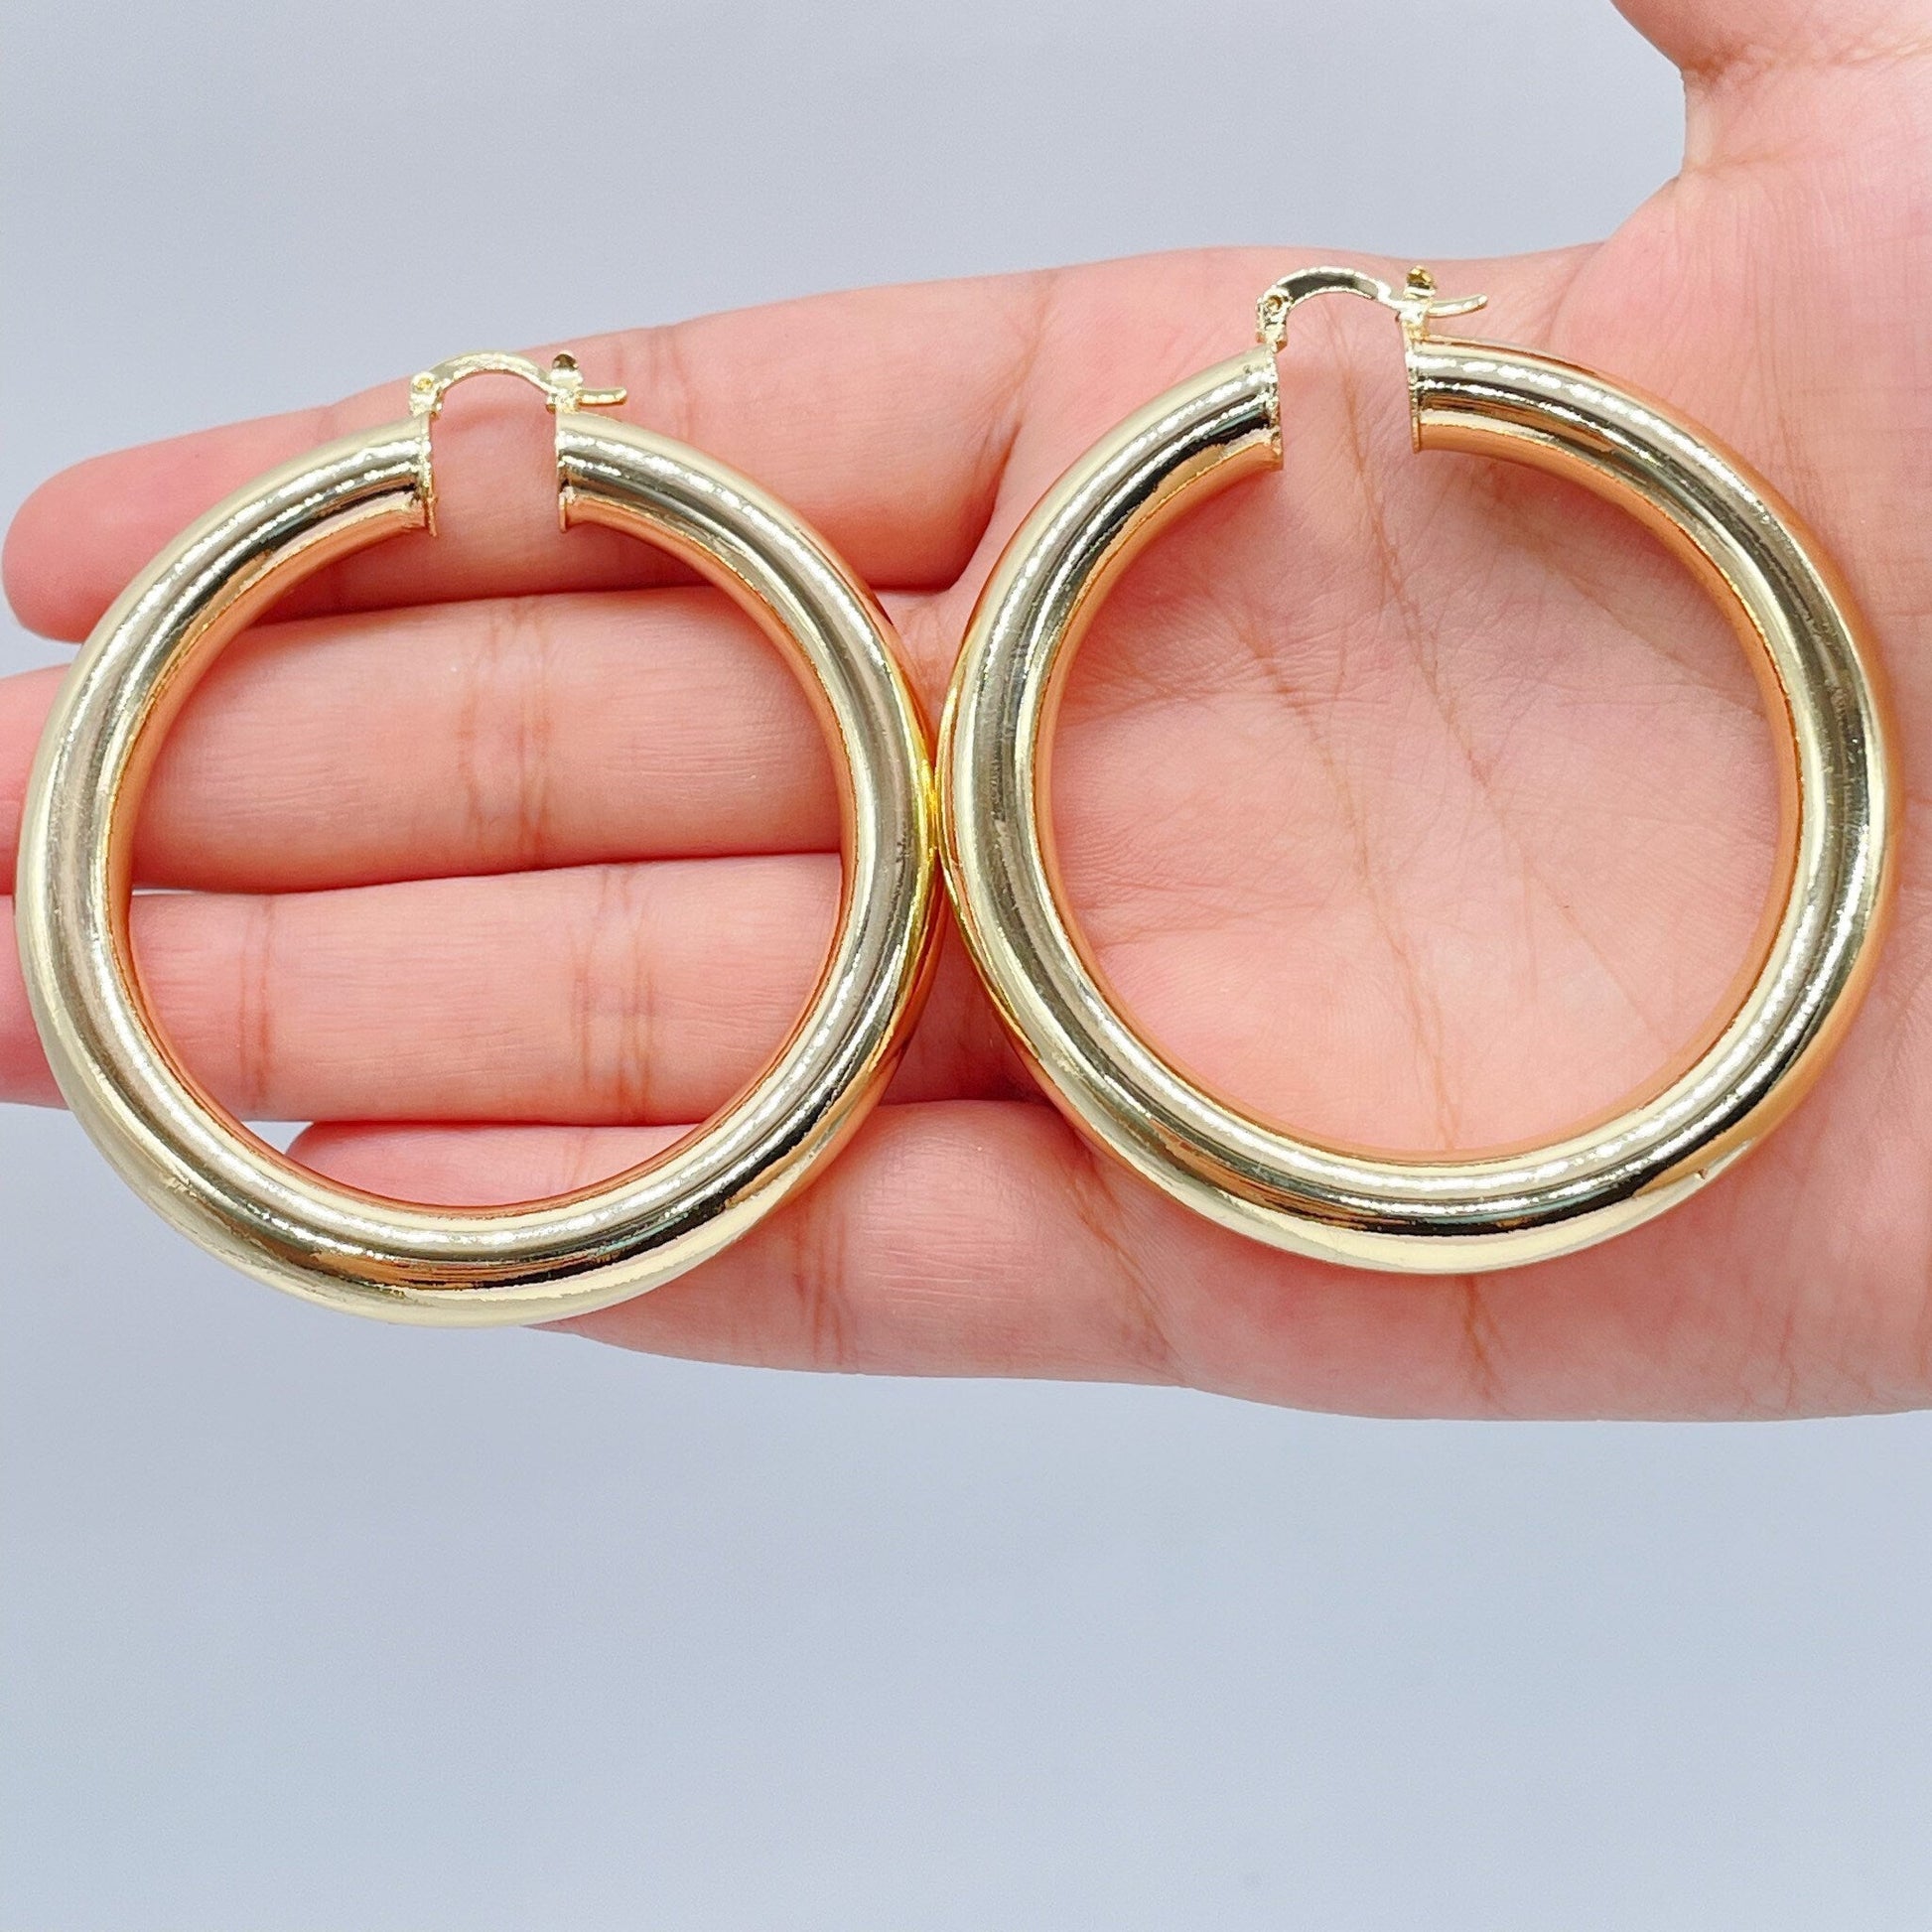 Extrusion Thick Small Gold Hoop Earrings – Elior Fine Jewelry